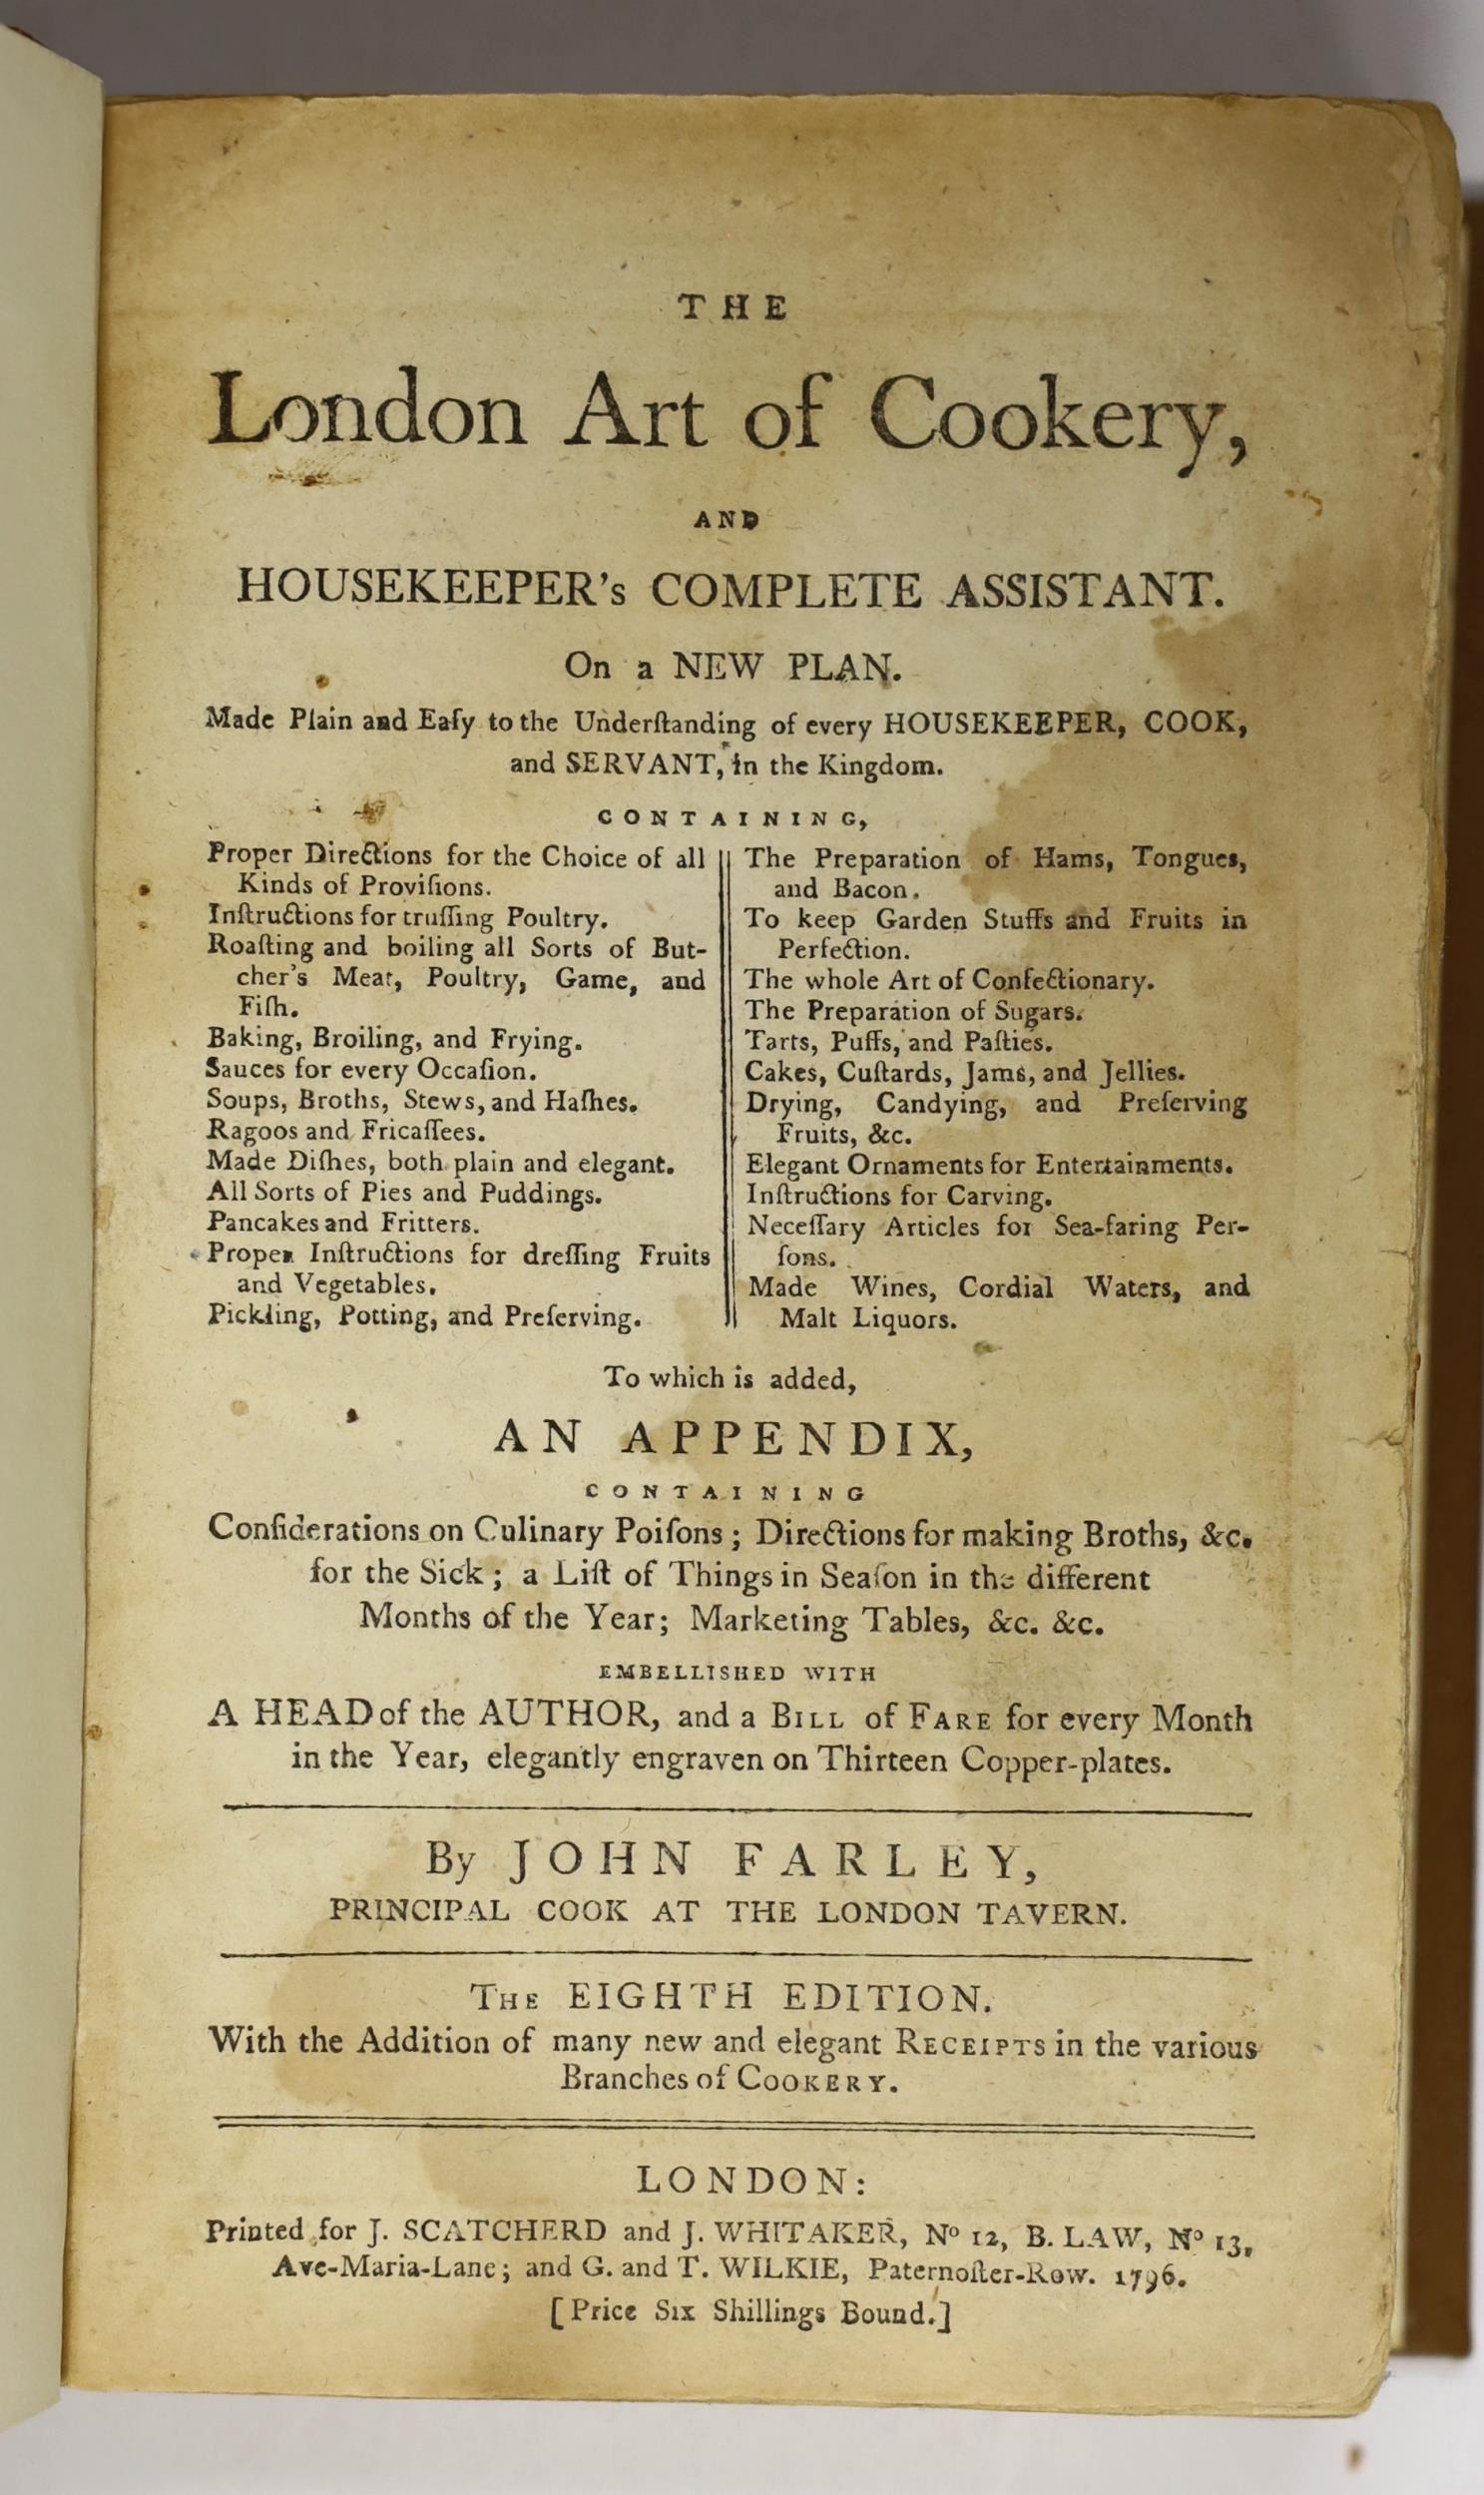 ° ° Farley, John - The London Art of Cookery and Housekeeper’s Complete Assistant, 8th edition, 8vo,